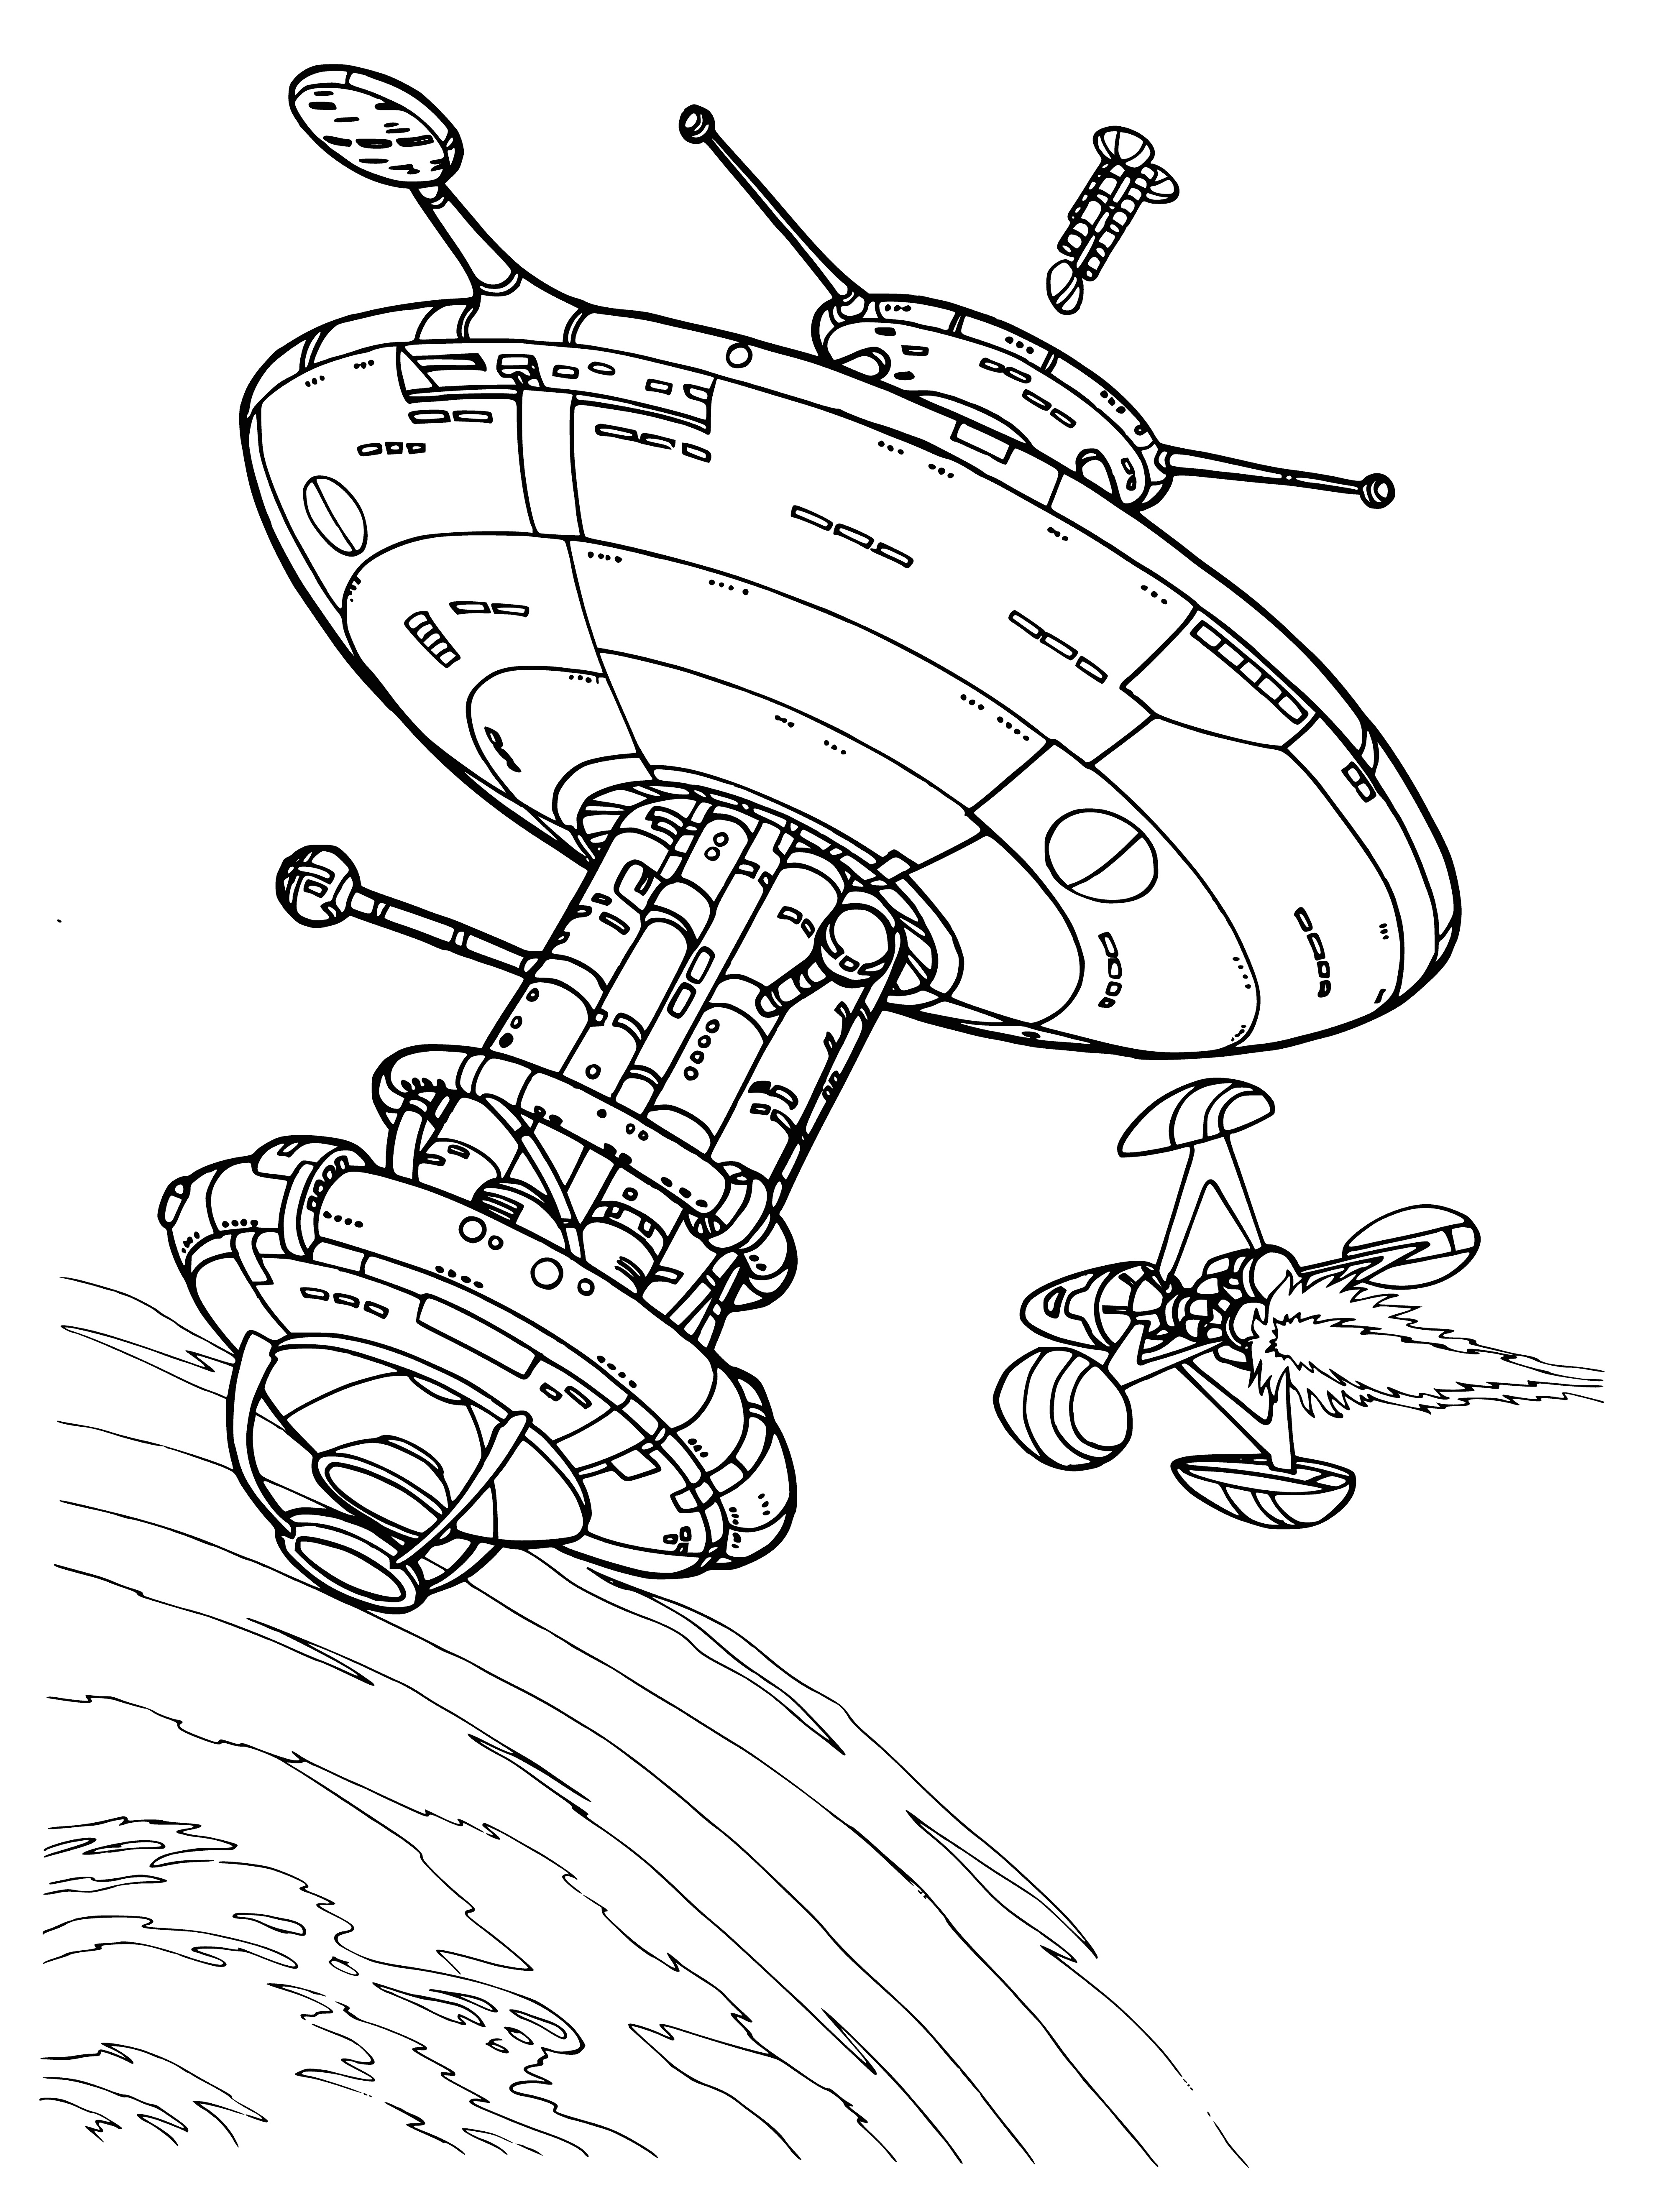 coloring page: Space station is a large satellite for people to live & work in, designed for long-term habitation. Provides living quarters, workspace, docking ports & propulsion system.